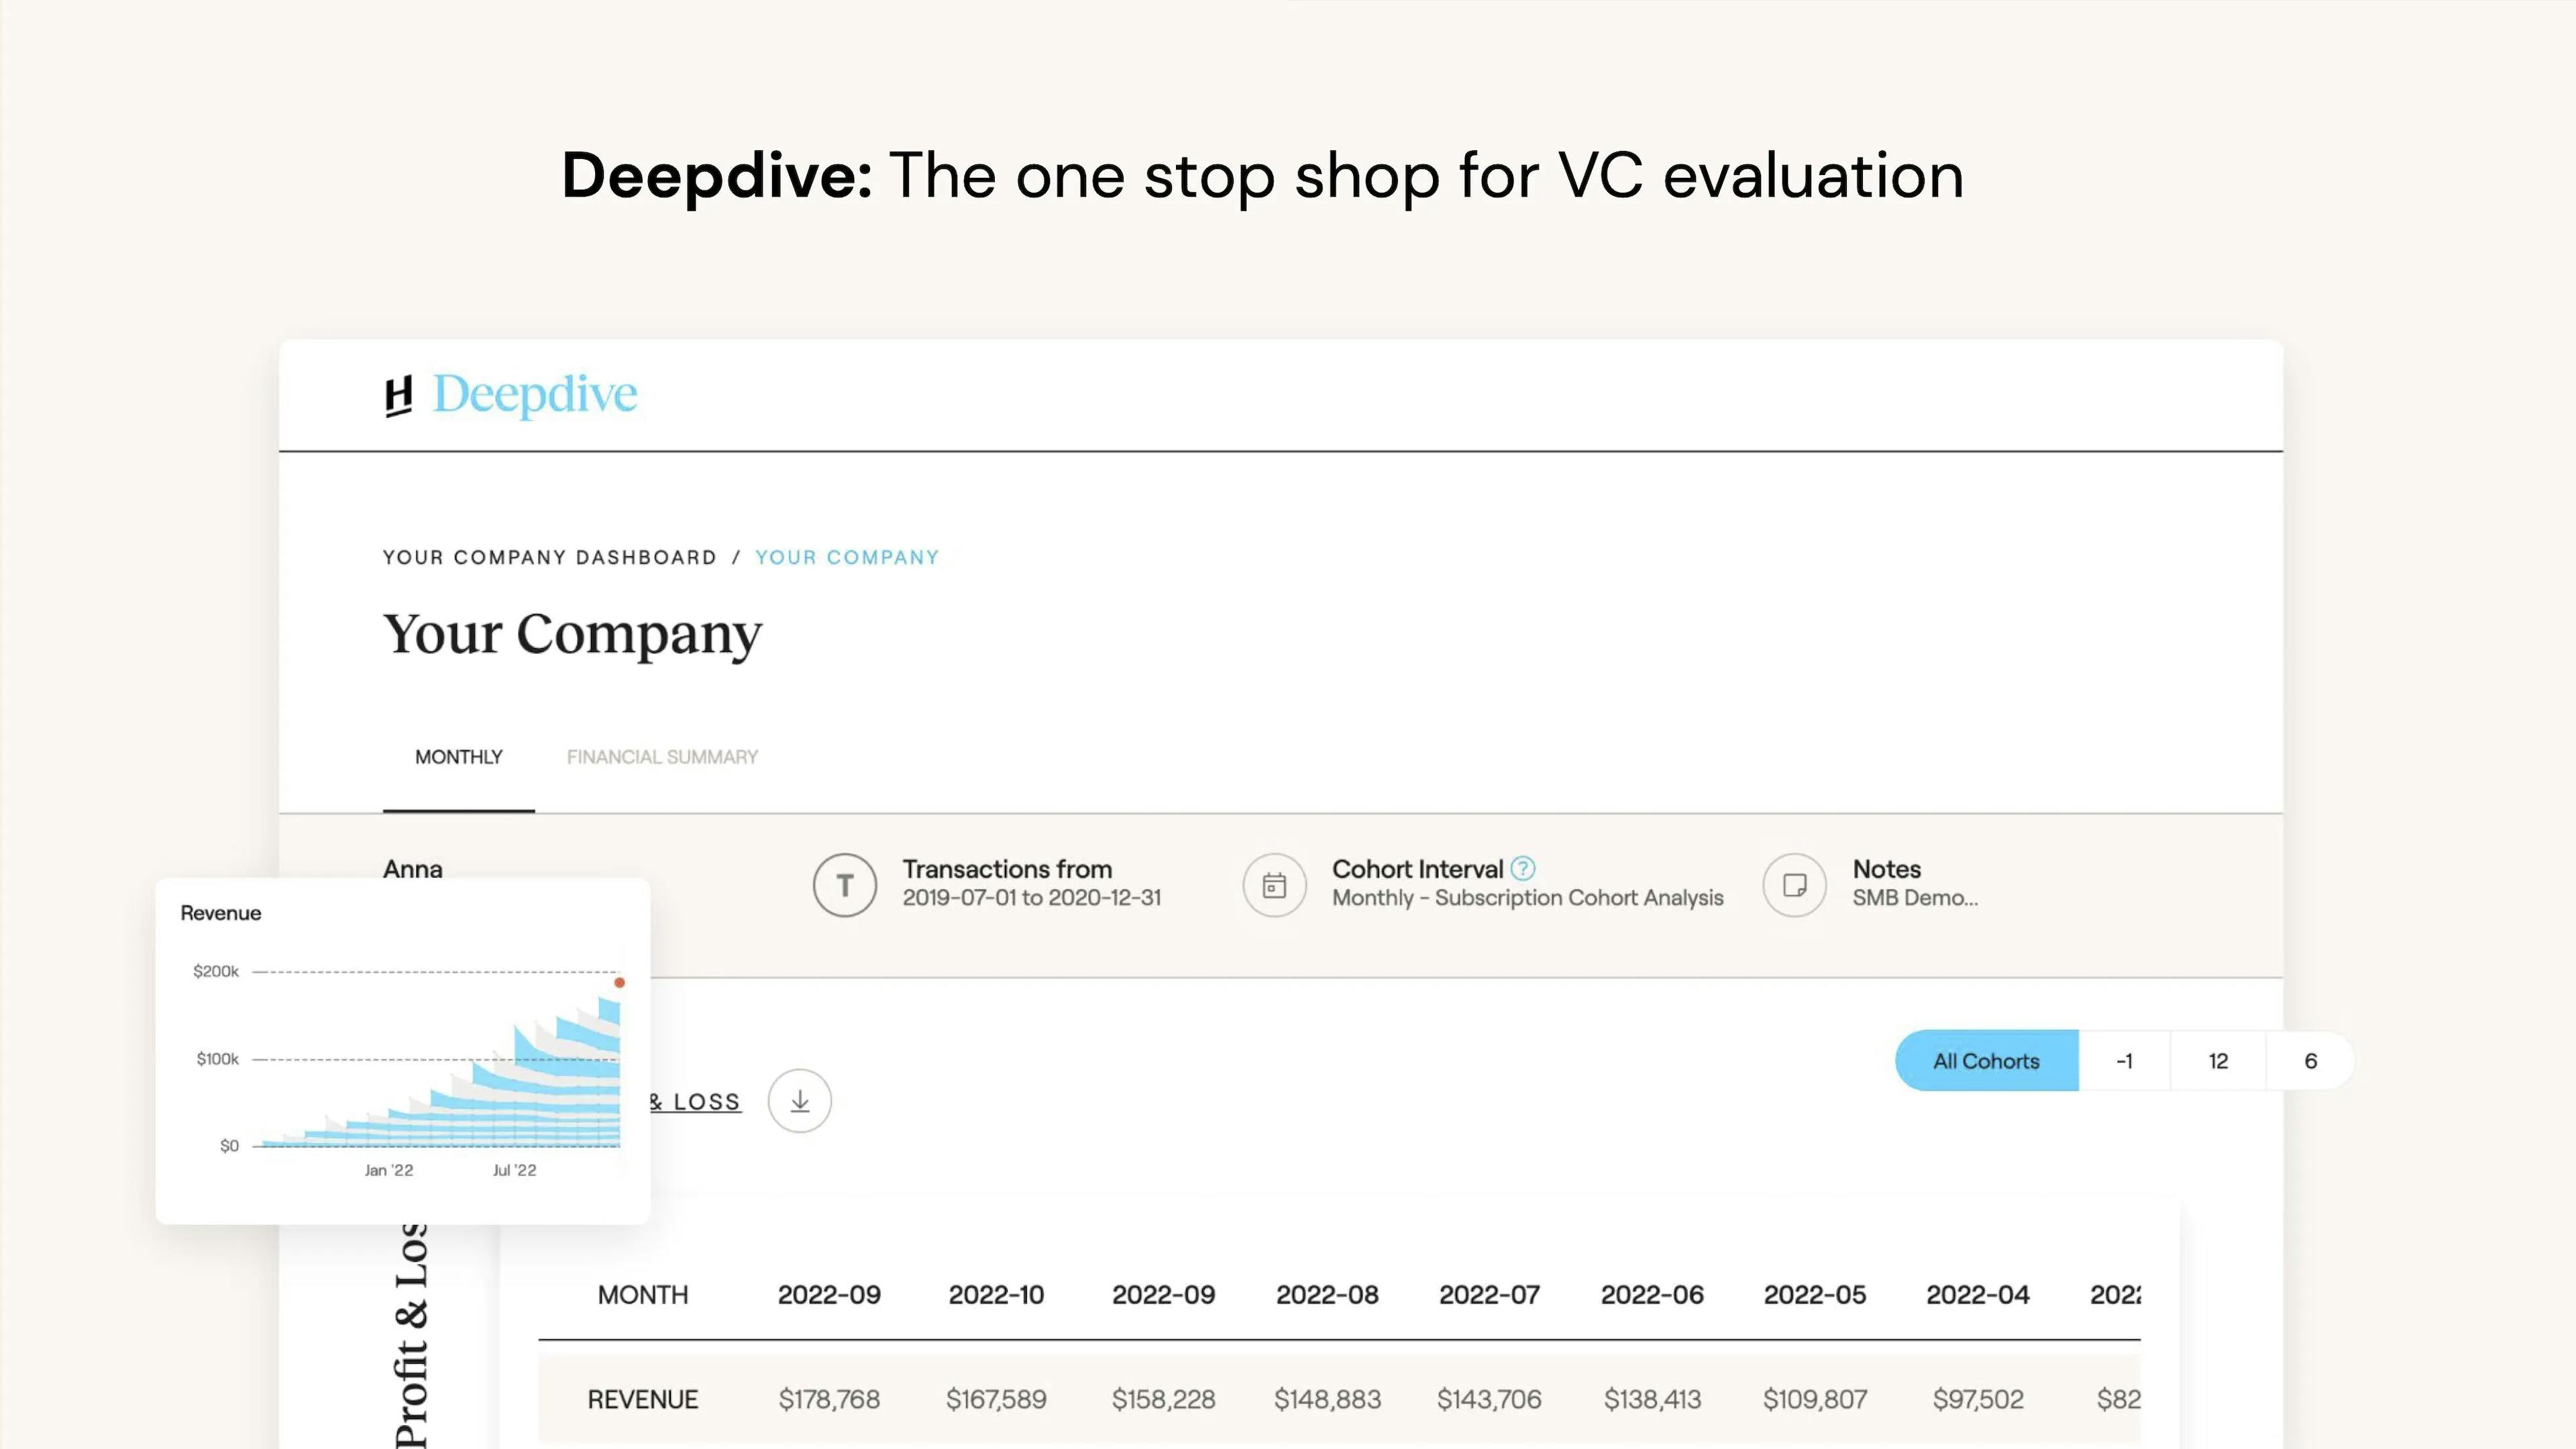 The one stop shop for VC evaluation